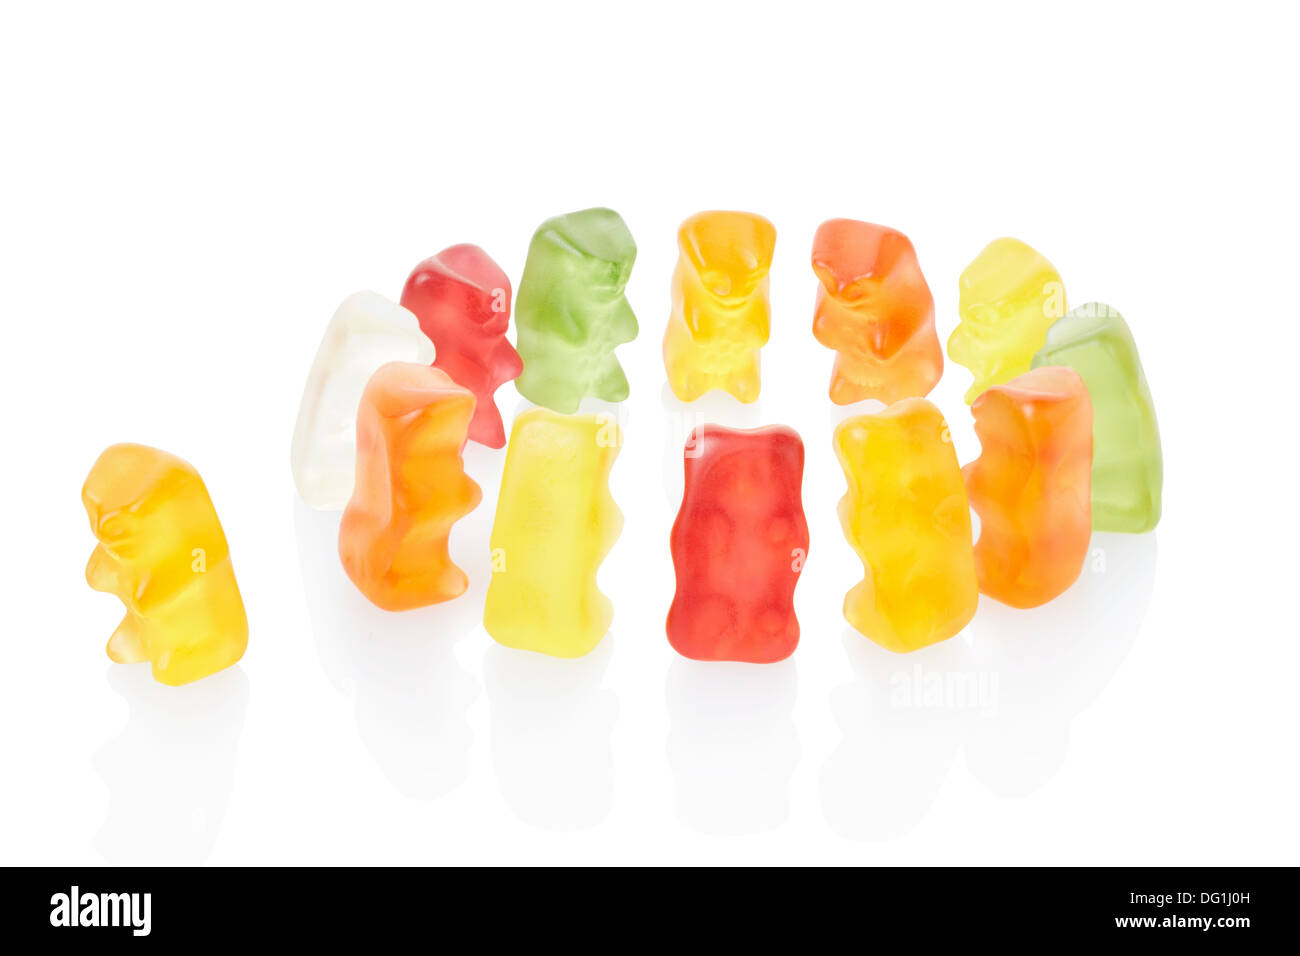 Gummy bears exclusion concept Stock Photo